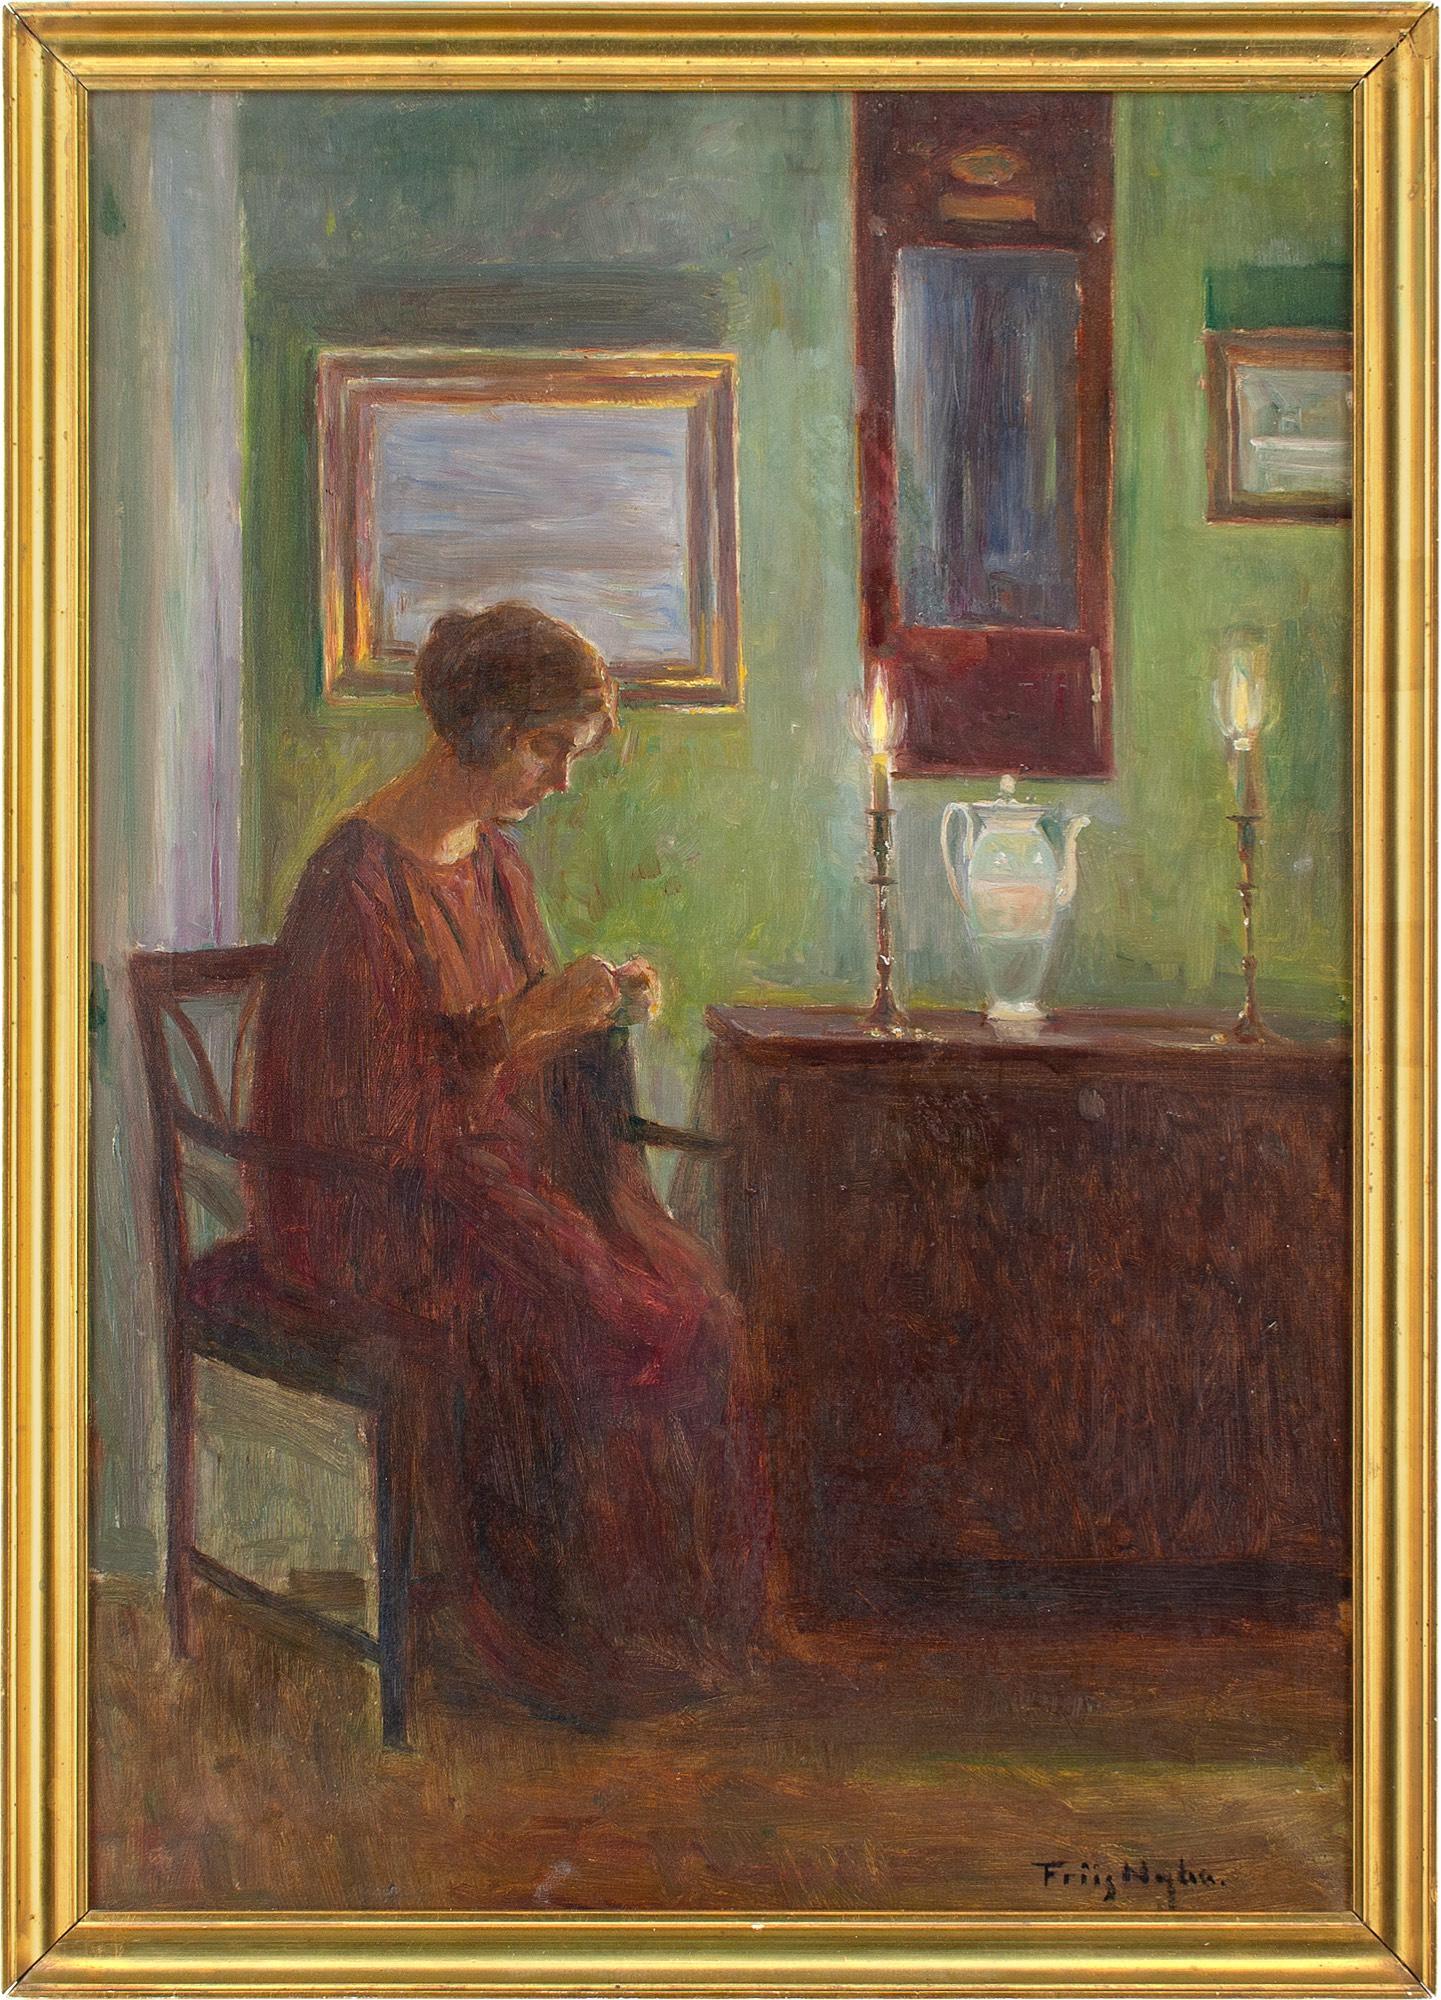 This early 20th-century oil painting by Danish artist Poul Friis Nybo (1869-1929) depicts a woman sewing within a candlelit interior.

Nybo favoured the quiet moments of domestic introspection that would otherwise pass us by. Candles flicker